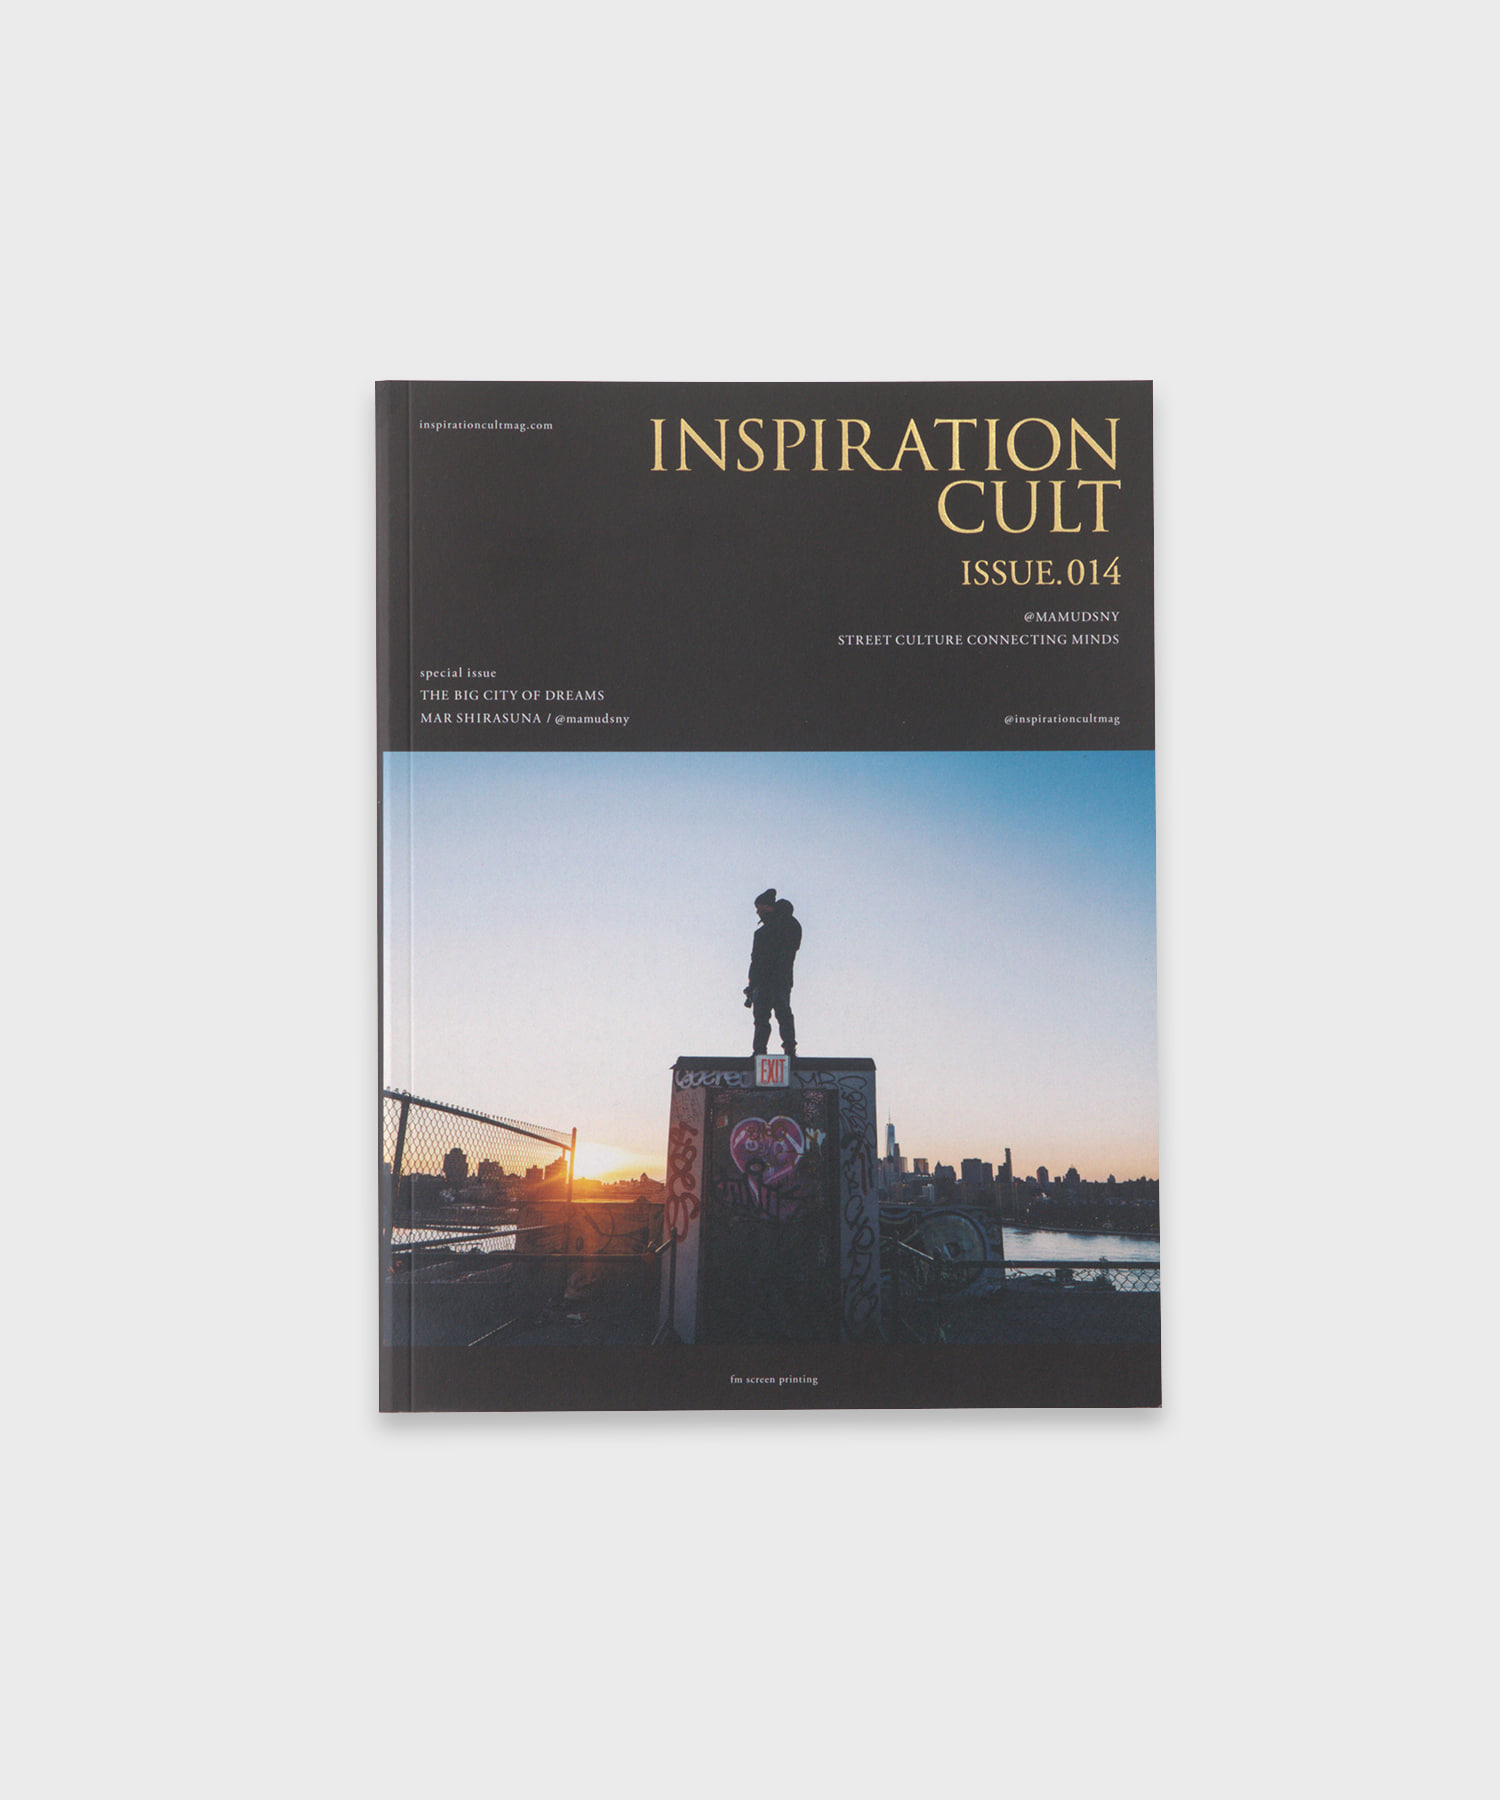 Inspiration Cult Magazine Issue. 014 (Special Issue at Mamudsny)